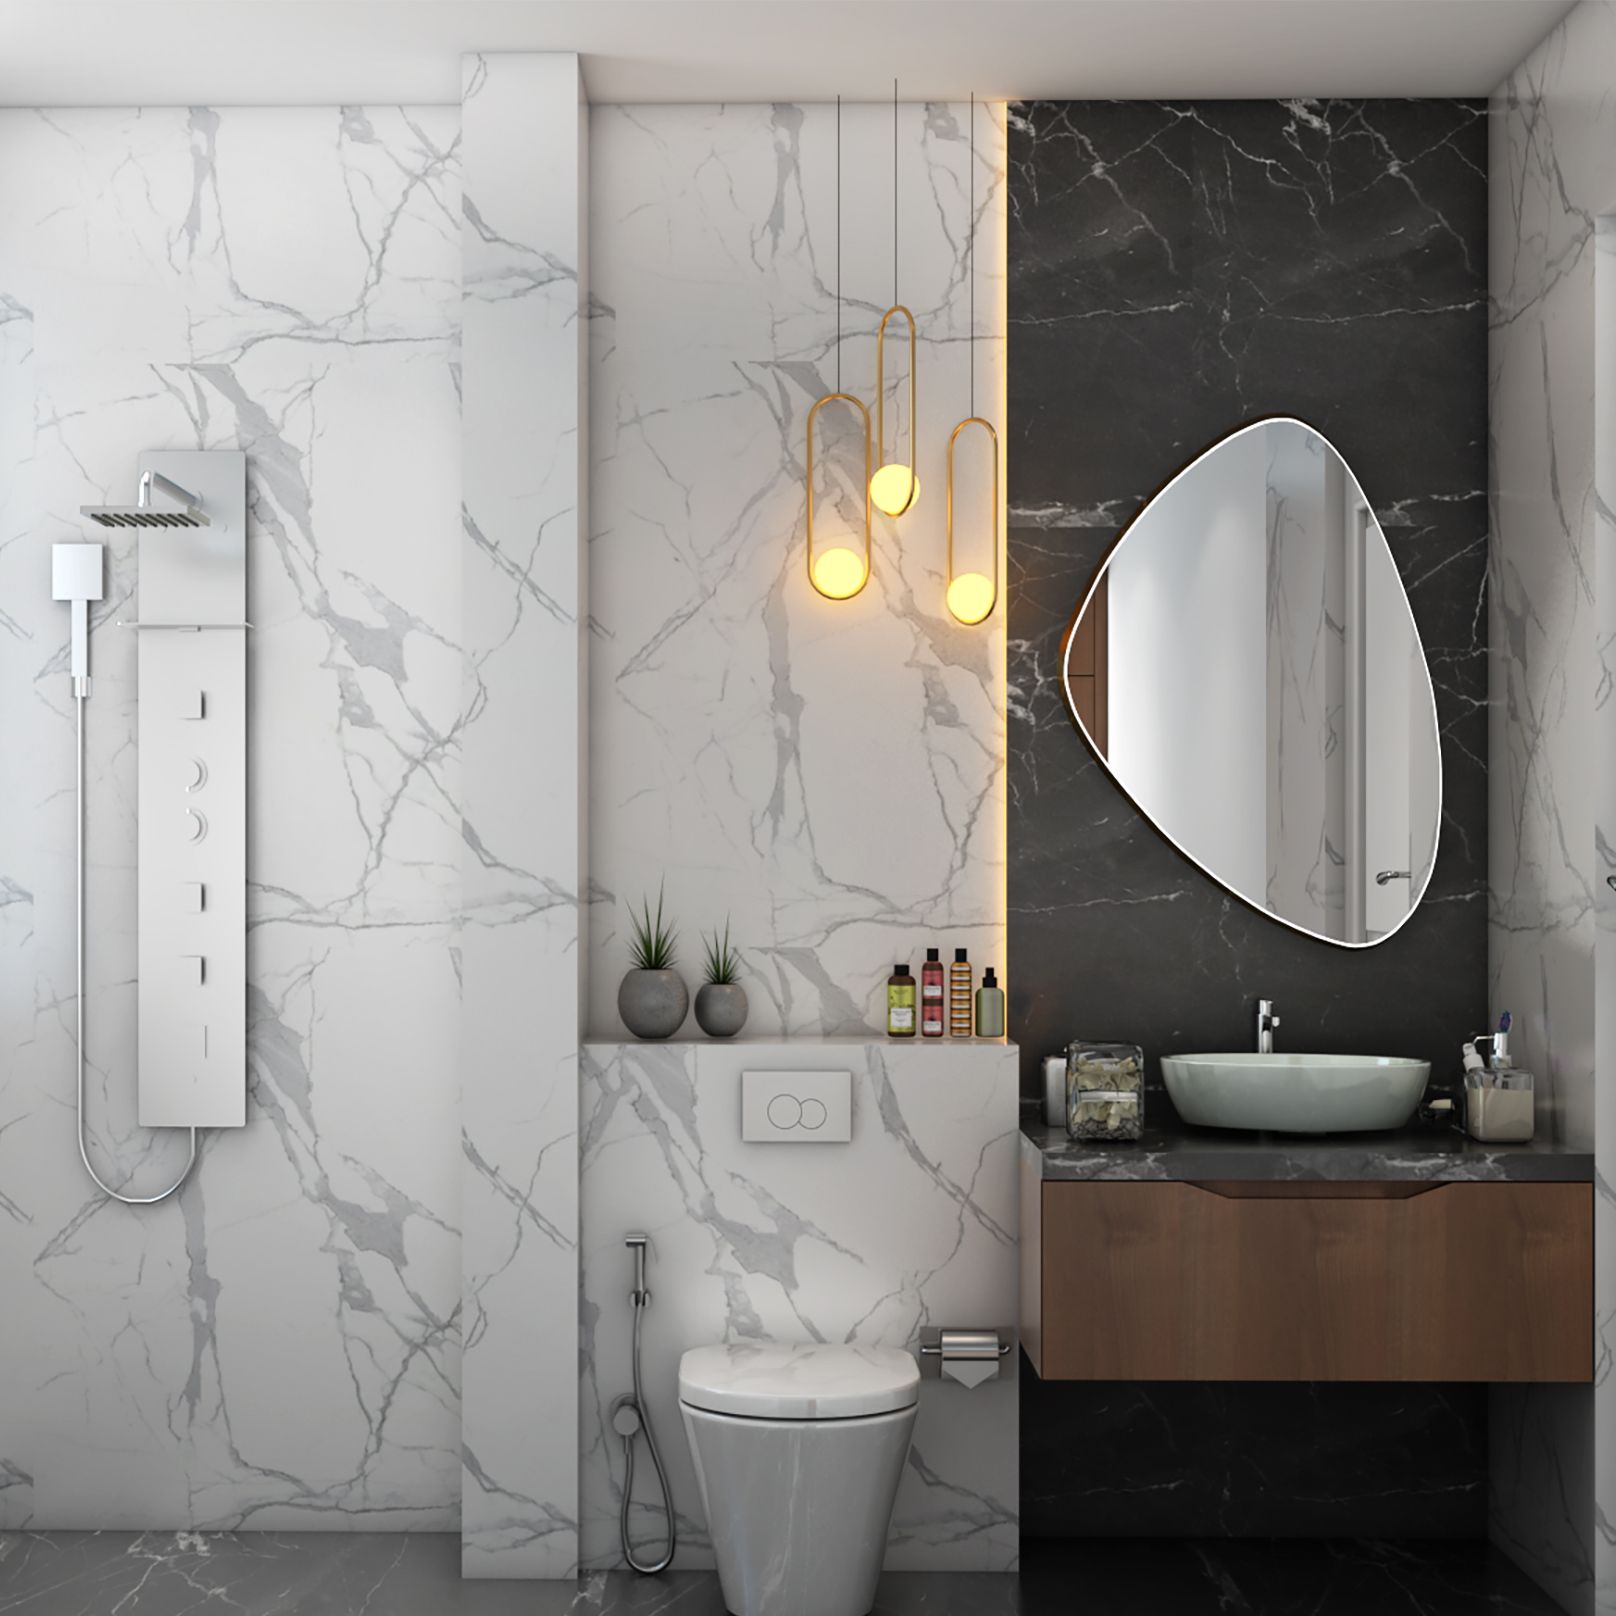 Small Bathroom Idea With A Designer Mirror And LED Lighting